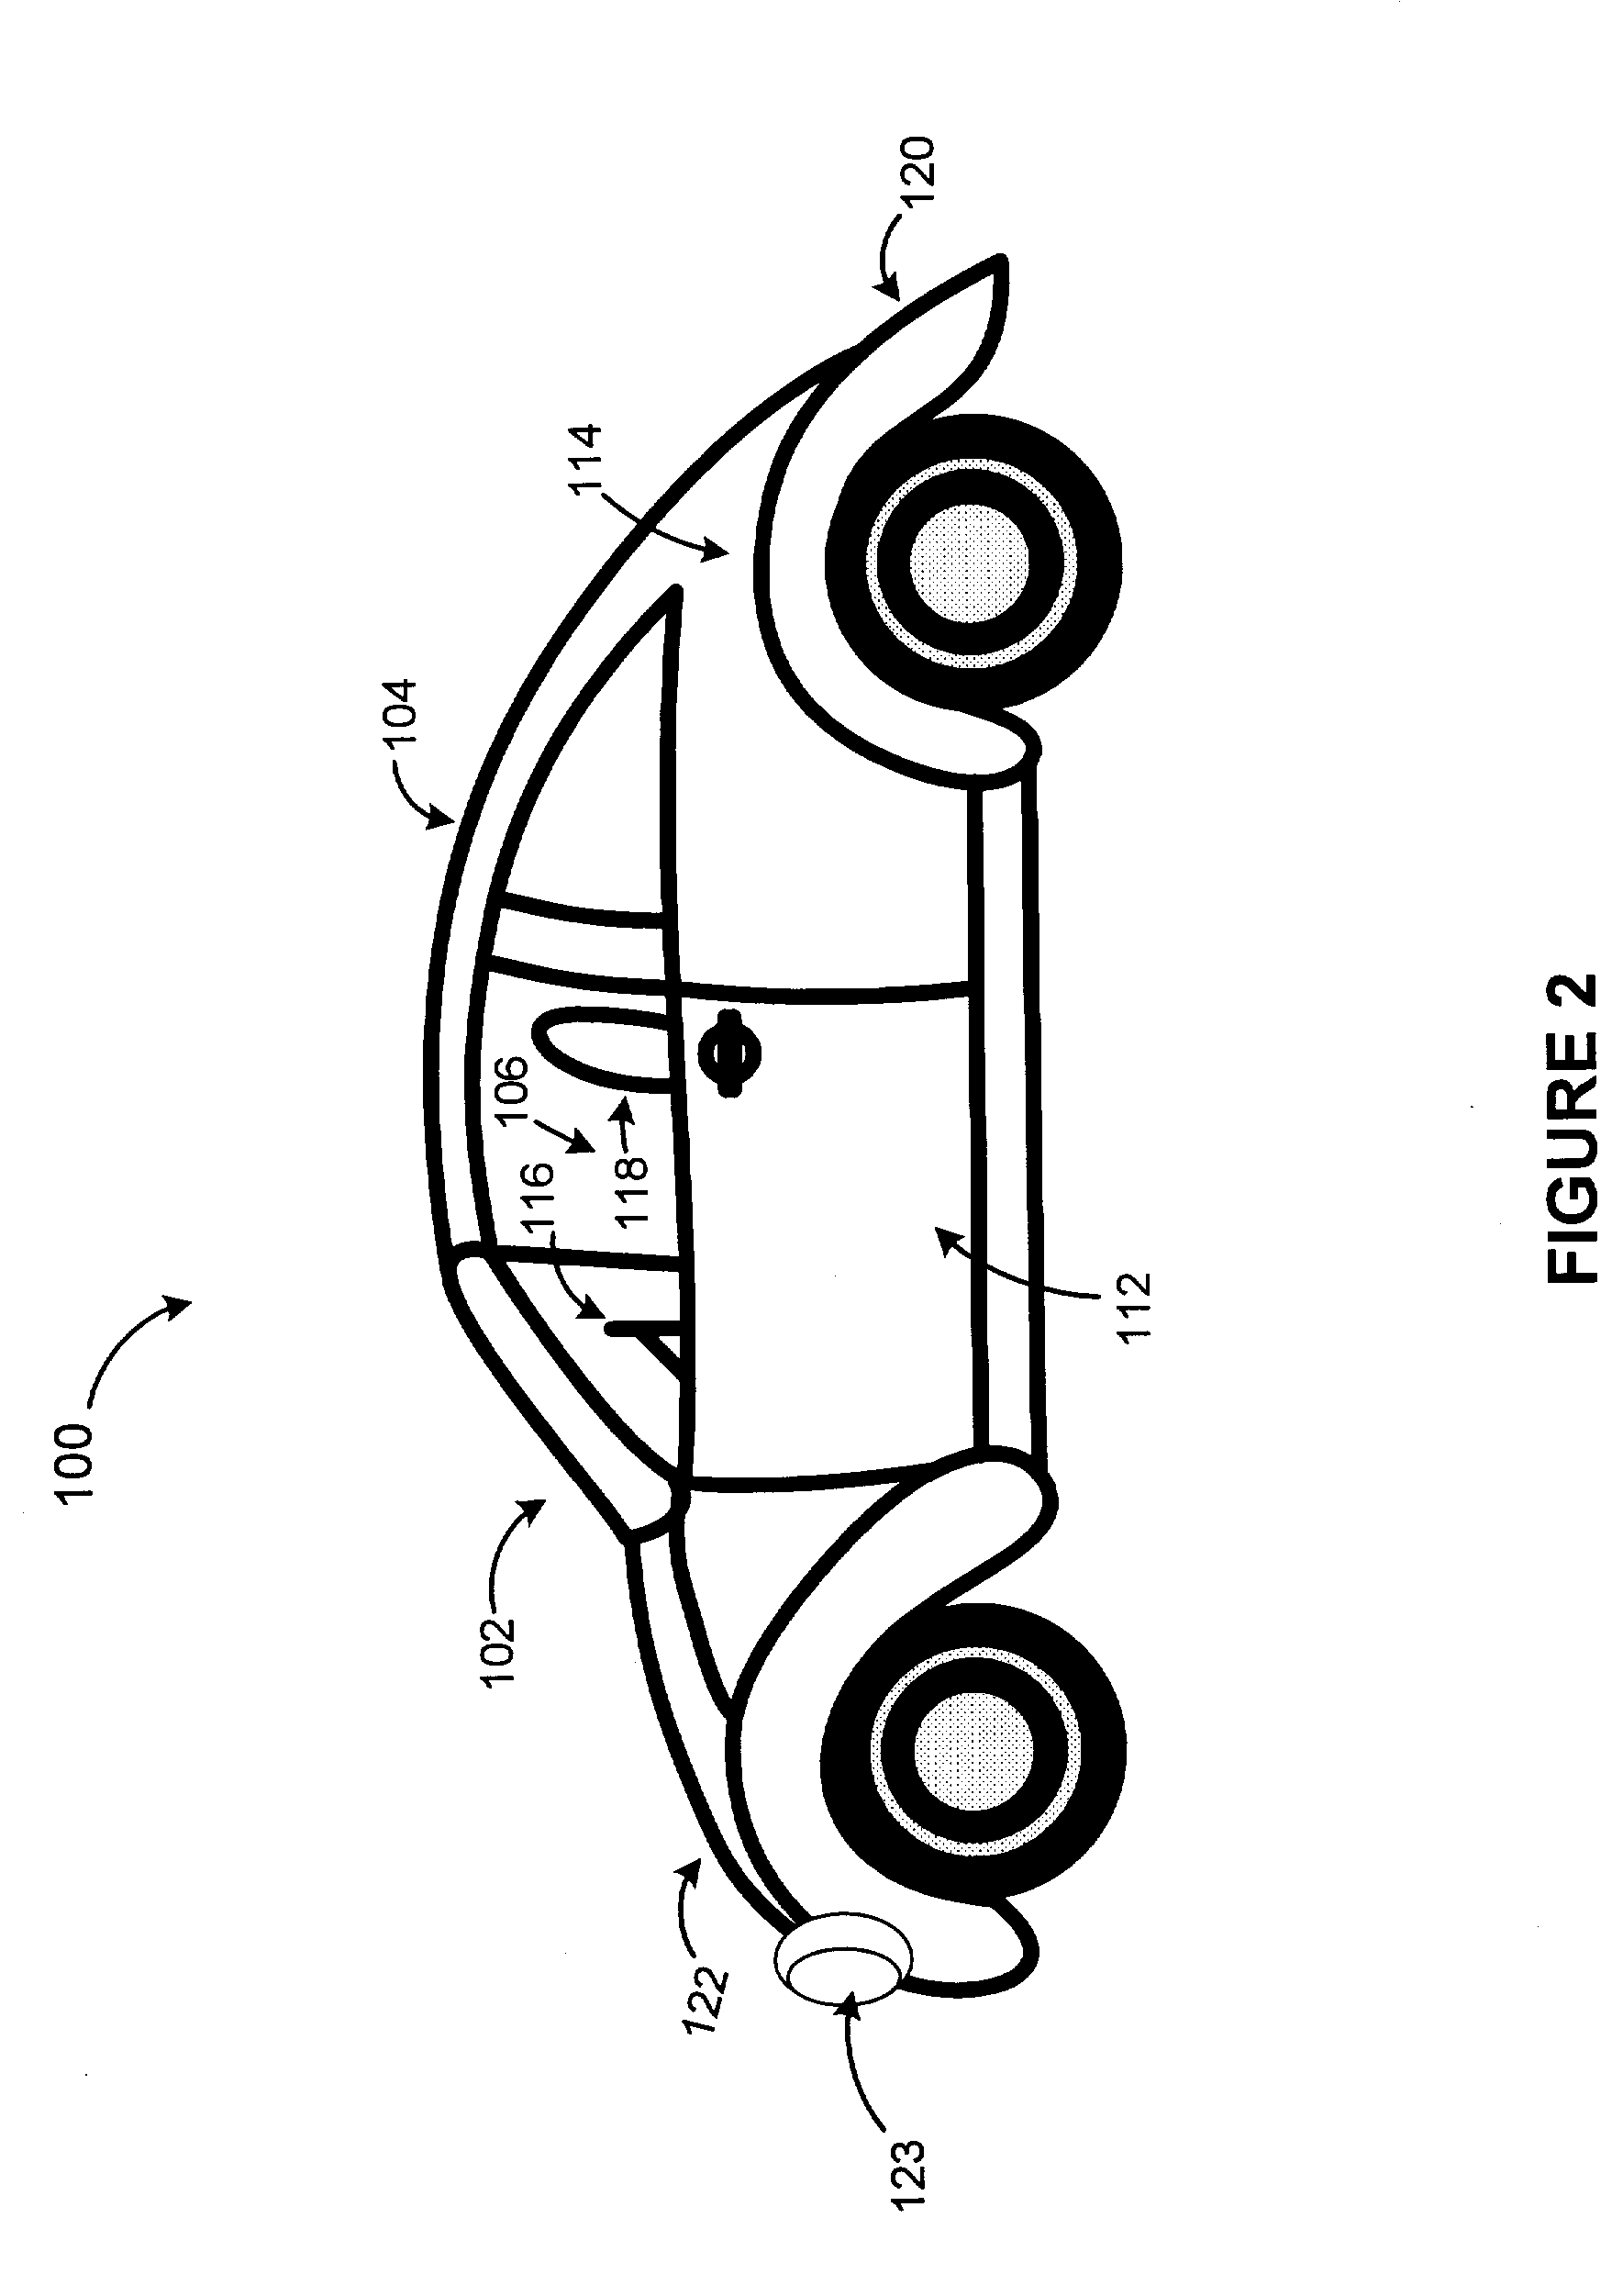 System and method for rain detection and automatic operation of power roof and power windows